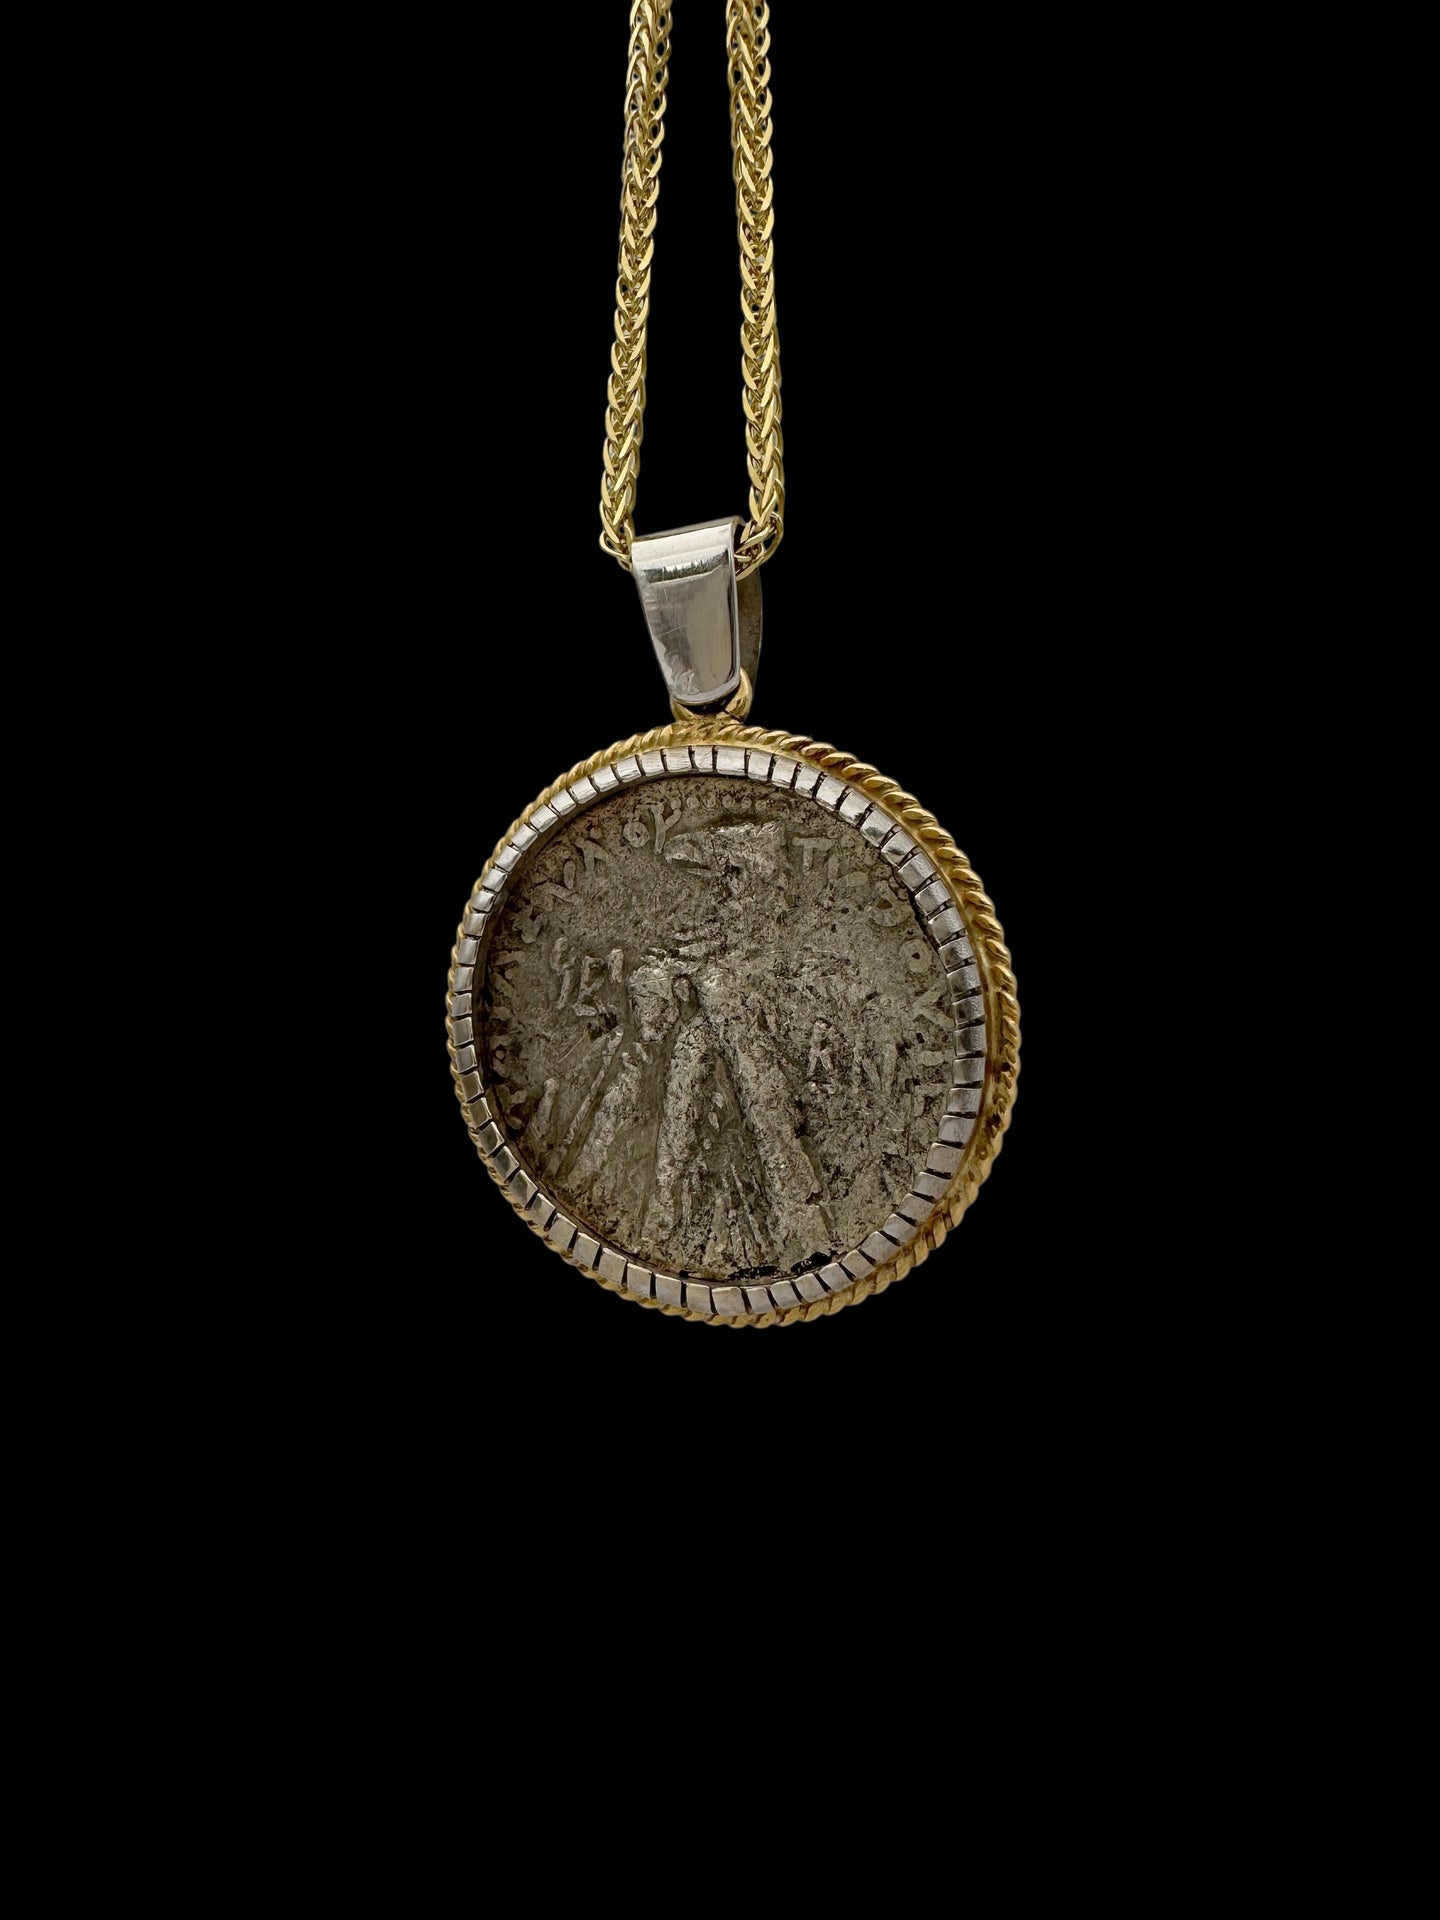 Ancient Shekel of Tyre Temple Tax Coin Set in 14K Two Tone Gold Pendant